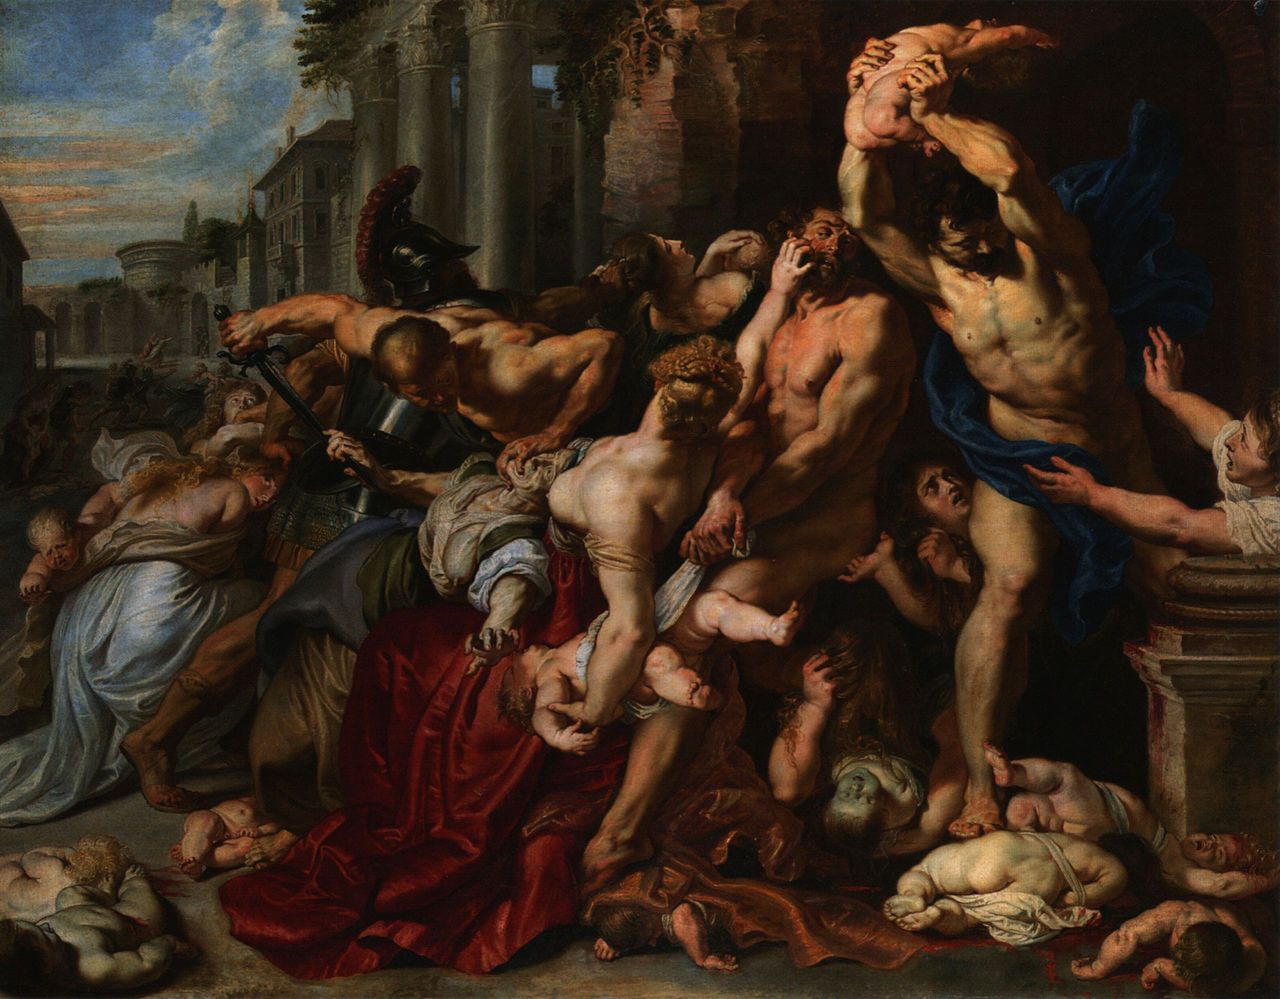 The Massacre of the Innocents by Peter Paul Rubens (1577–1640).